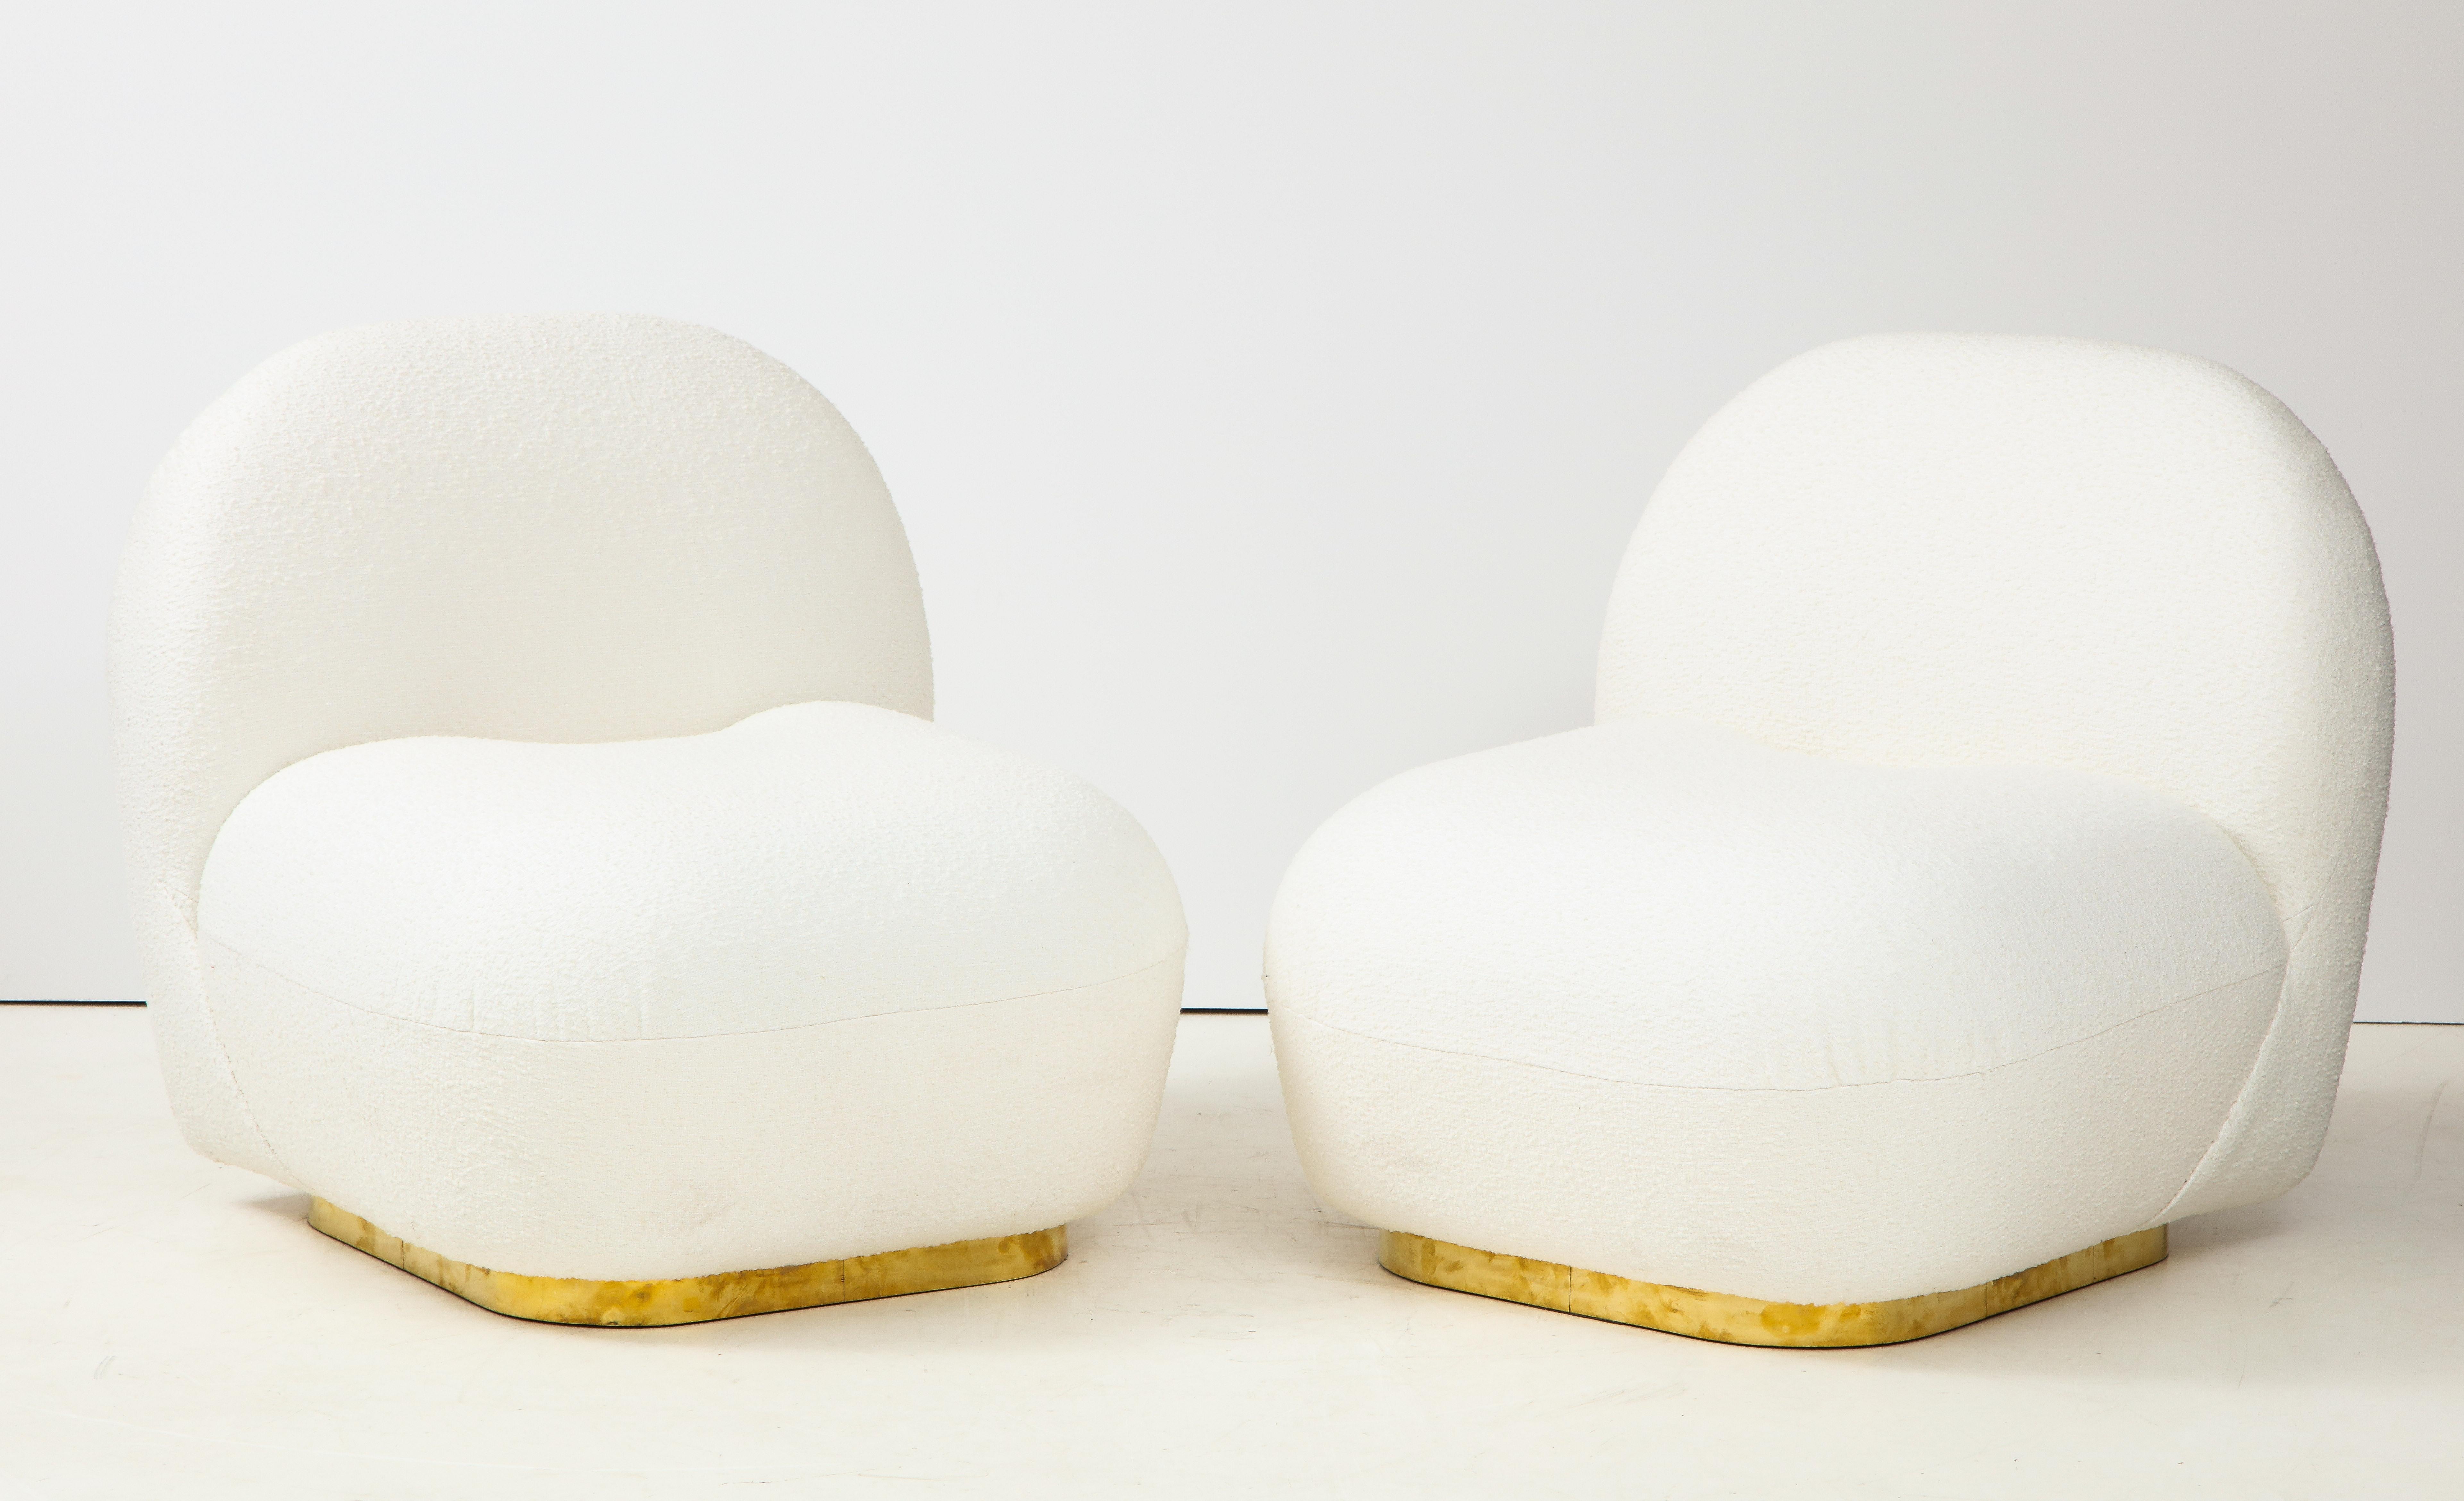 Pair of ivory bouclé sculptural lounge or slipper chairs custom made in Florence, Italy. Superb craftsmanship and design lines. With modern rounded padded back and seats, these slipper chairs are extremely comfortable and sit atop a polished brass